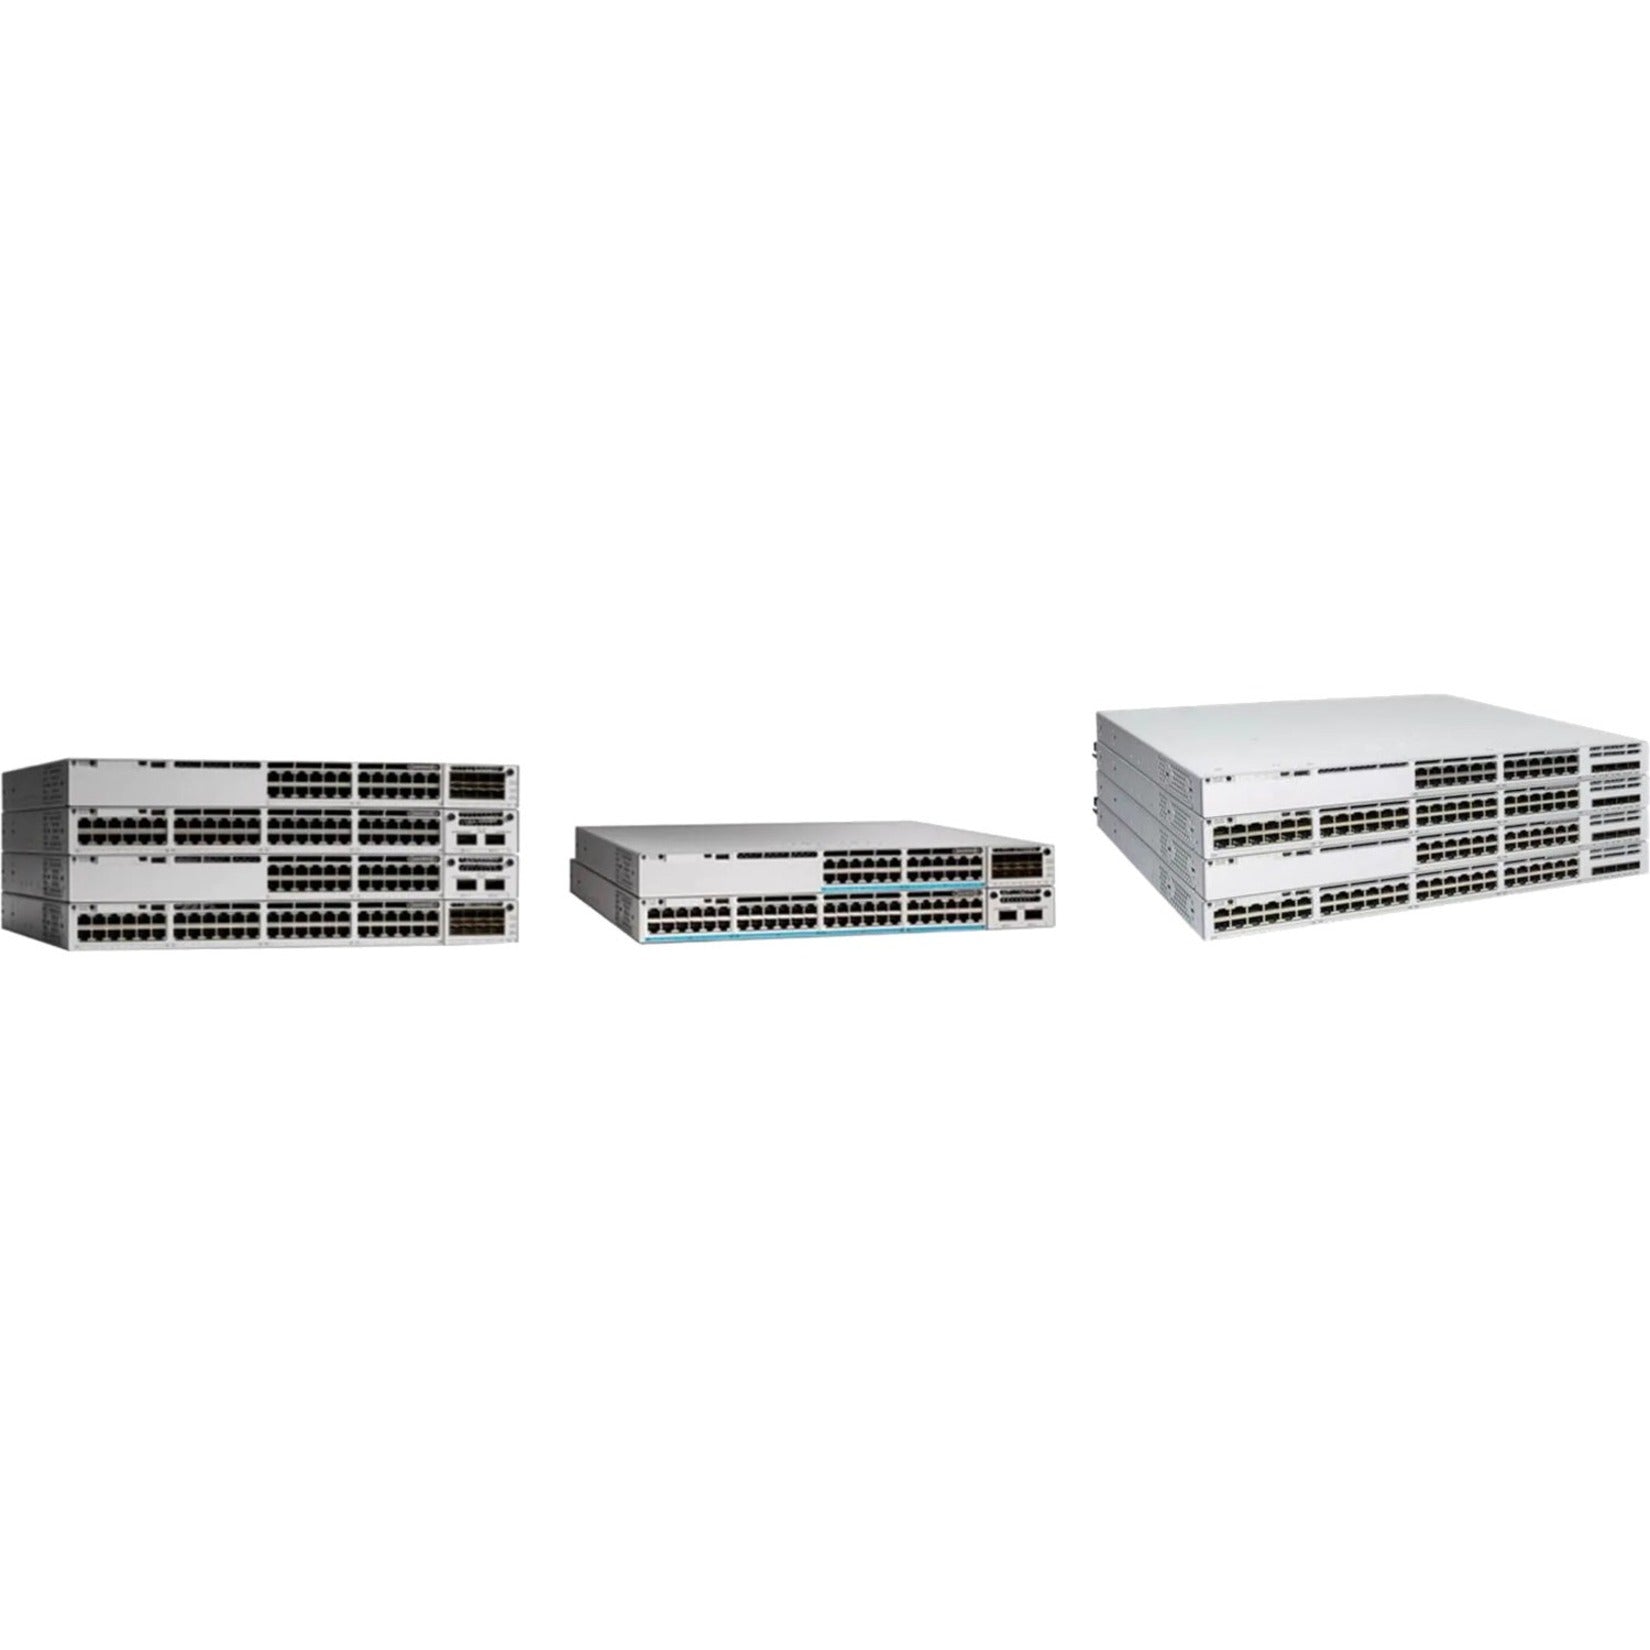 Cisco Catalyst 9300 48-port data only Network Advantage (C9300-48T-A)   Cisco Catalyst 9300 48-port dati solo Network Advantage (C9300-48T-A)